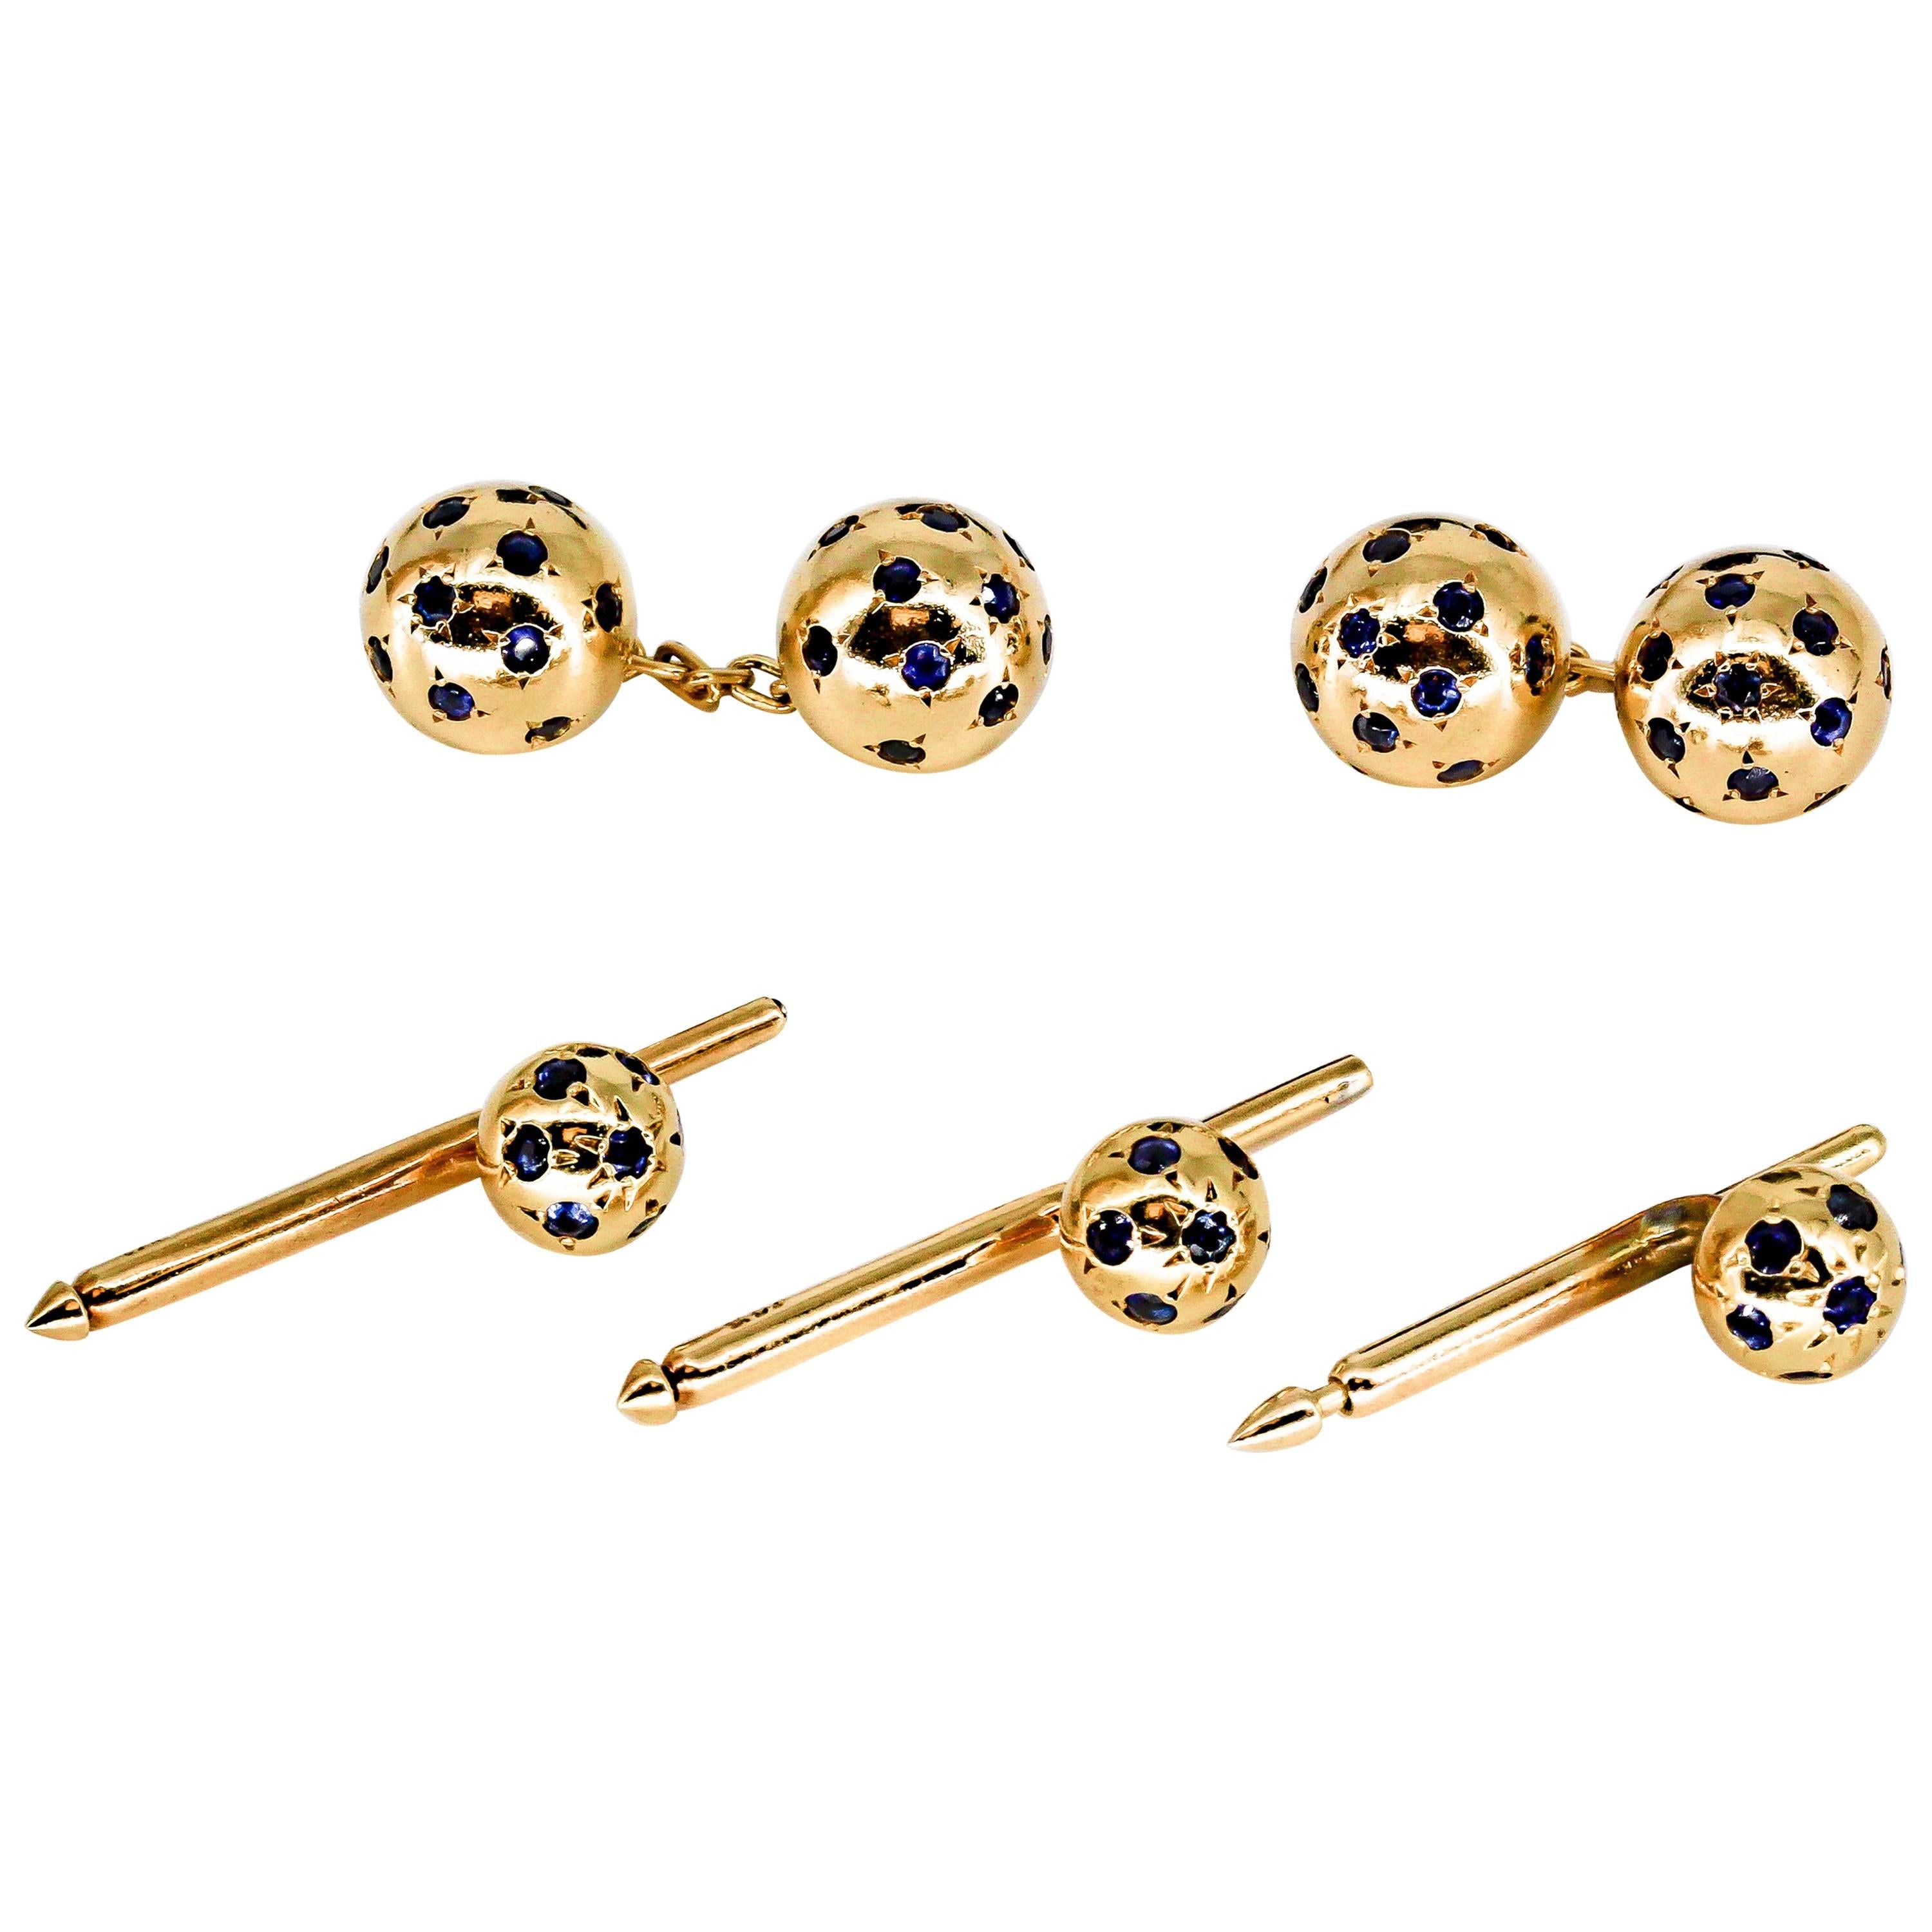 Van Cleef & Arpels Sapphire and Gold Ball Cufflink and Stud Set